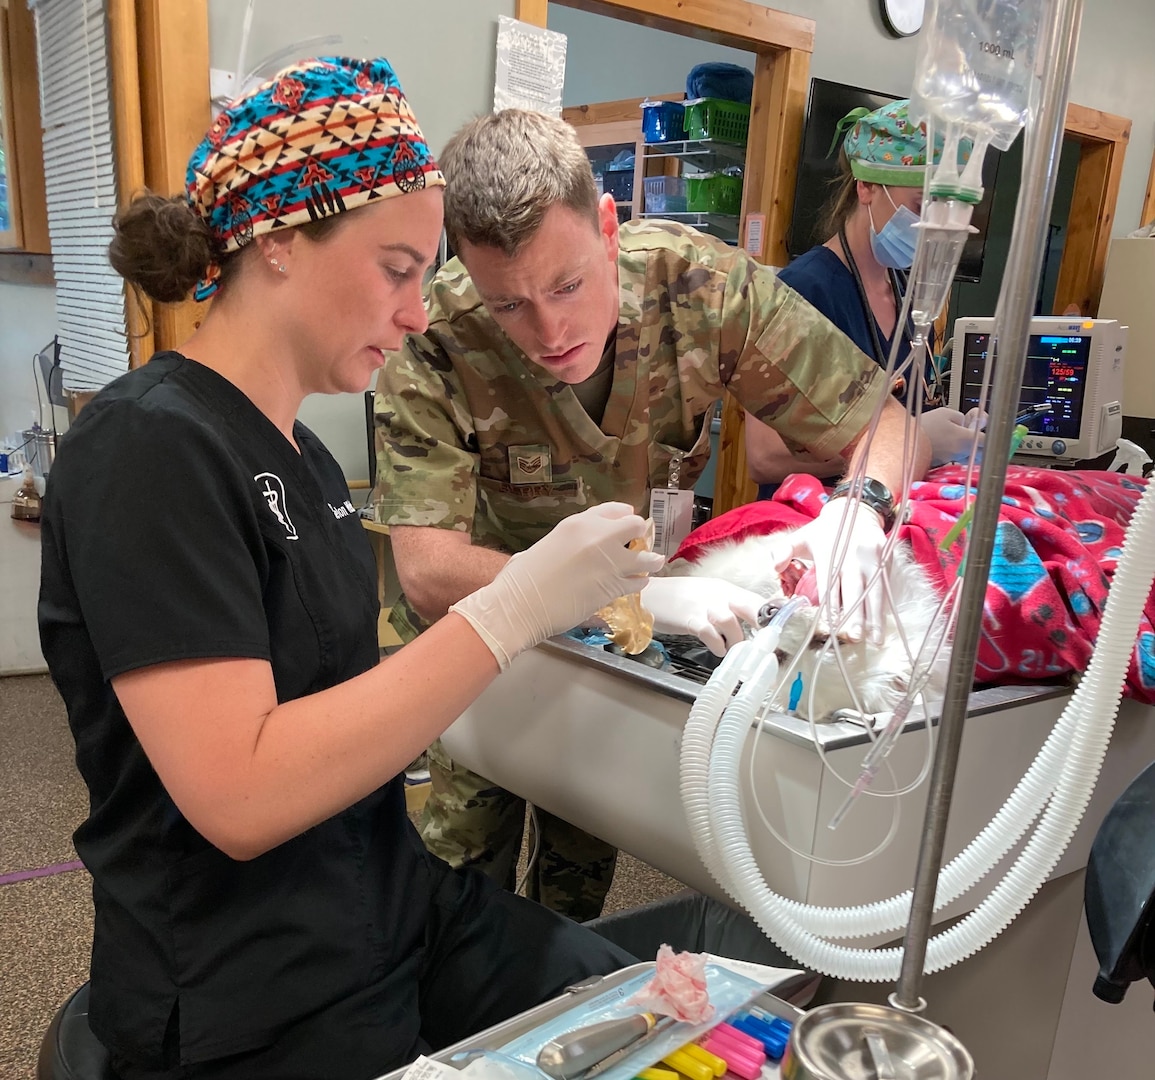 U.S. Air Force Staff Sgt. Michael Berry, 167th Medical Group medic, assists a veterinarian with a canine tooth extraction at Cheat Lake Animal Hospital, Cheat Lake, West Virginia, May 19, 2022. Berry and four other 167th MDG medics trained at J.W. Ruby Memorial Hospital and Cheat Lake Animal Hospital.